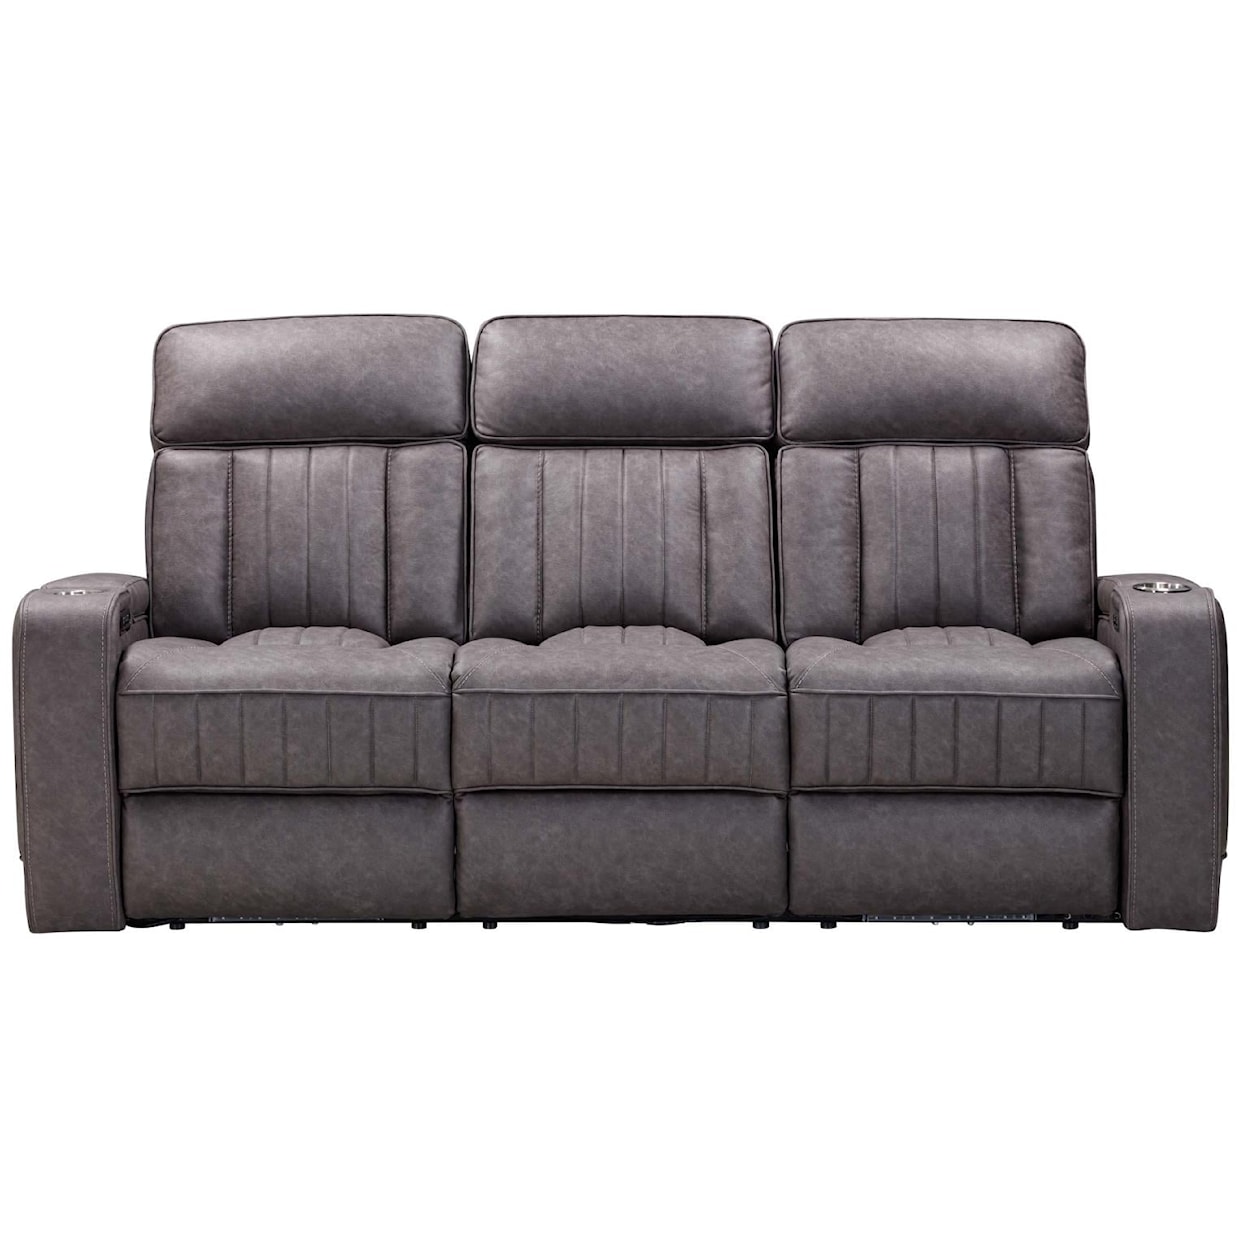 Paramount Living Equinox Power Sofa with Drop Down Table